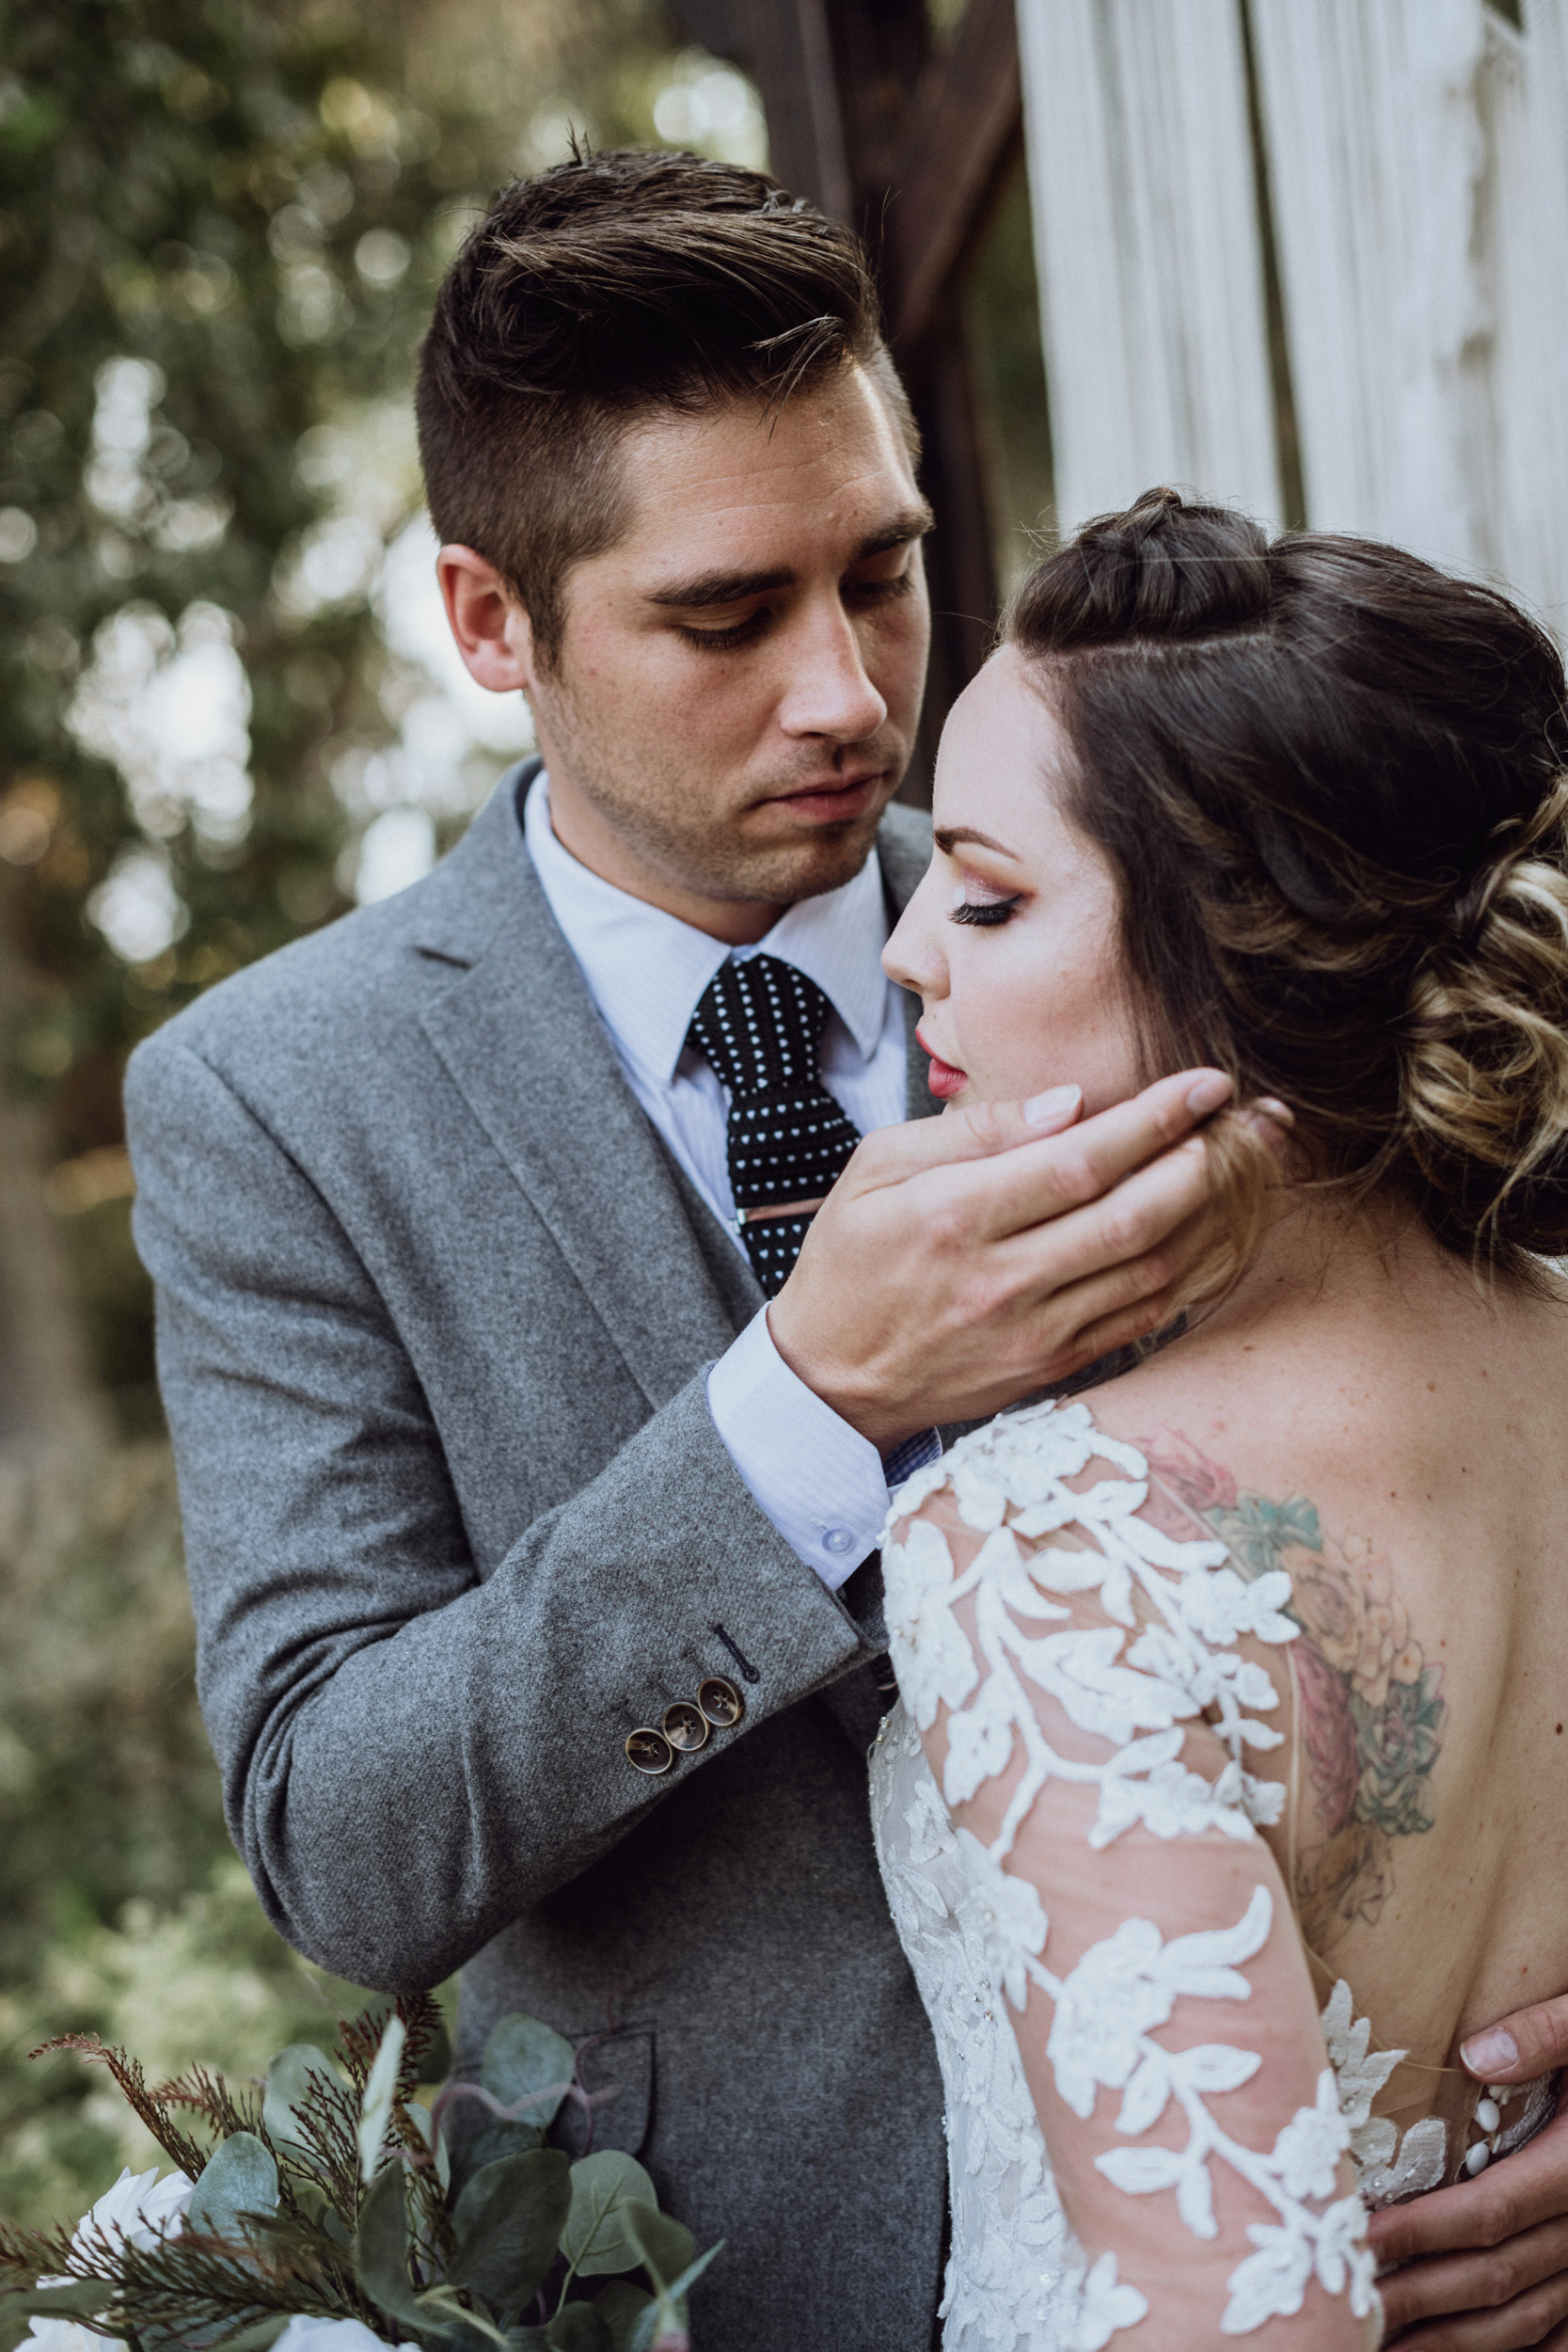 Groom touching brides face in front macrame